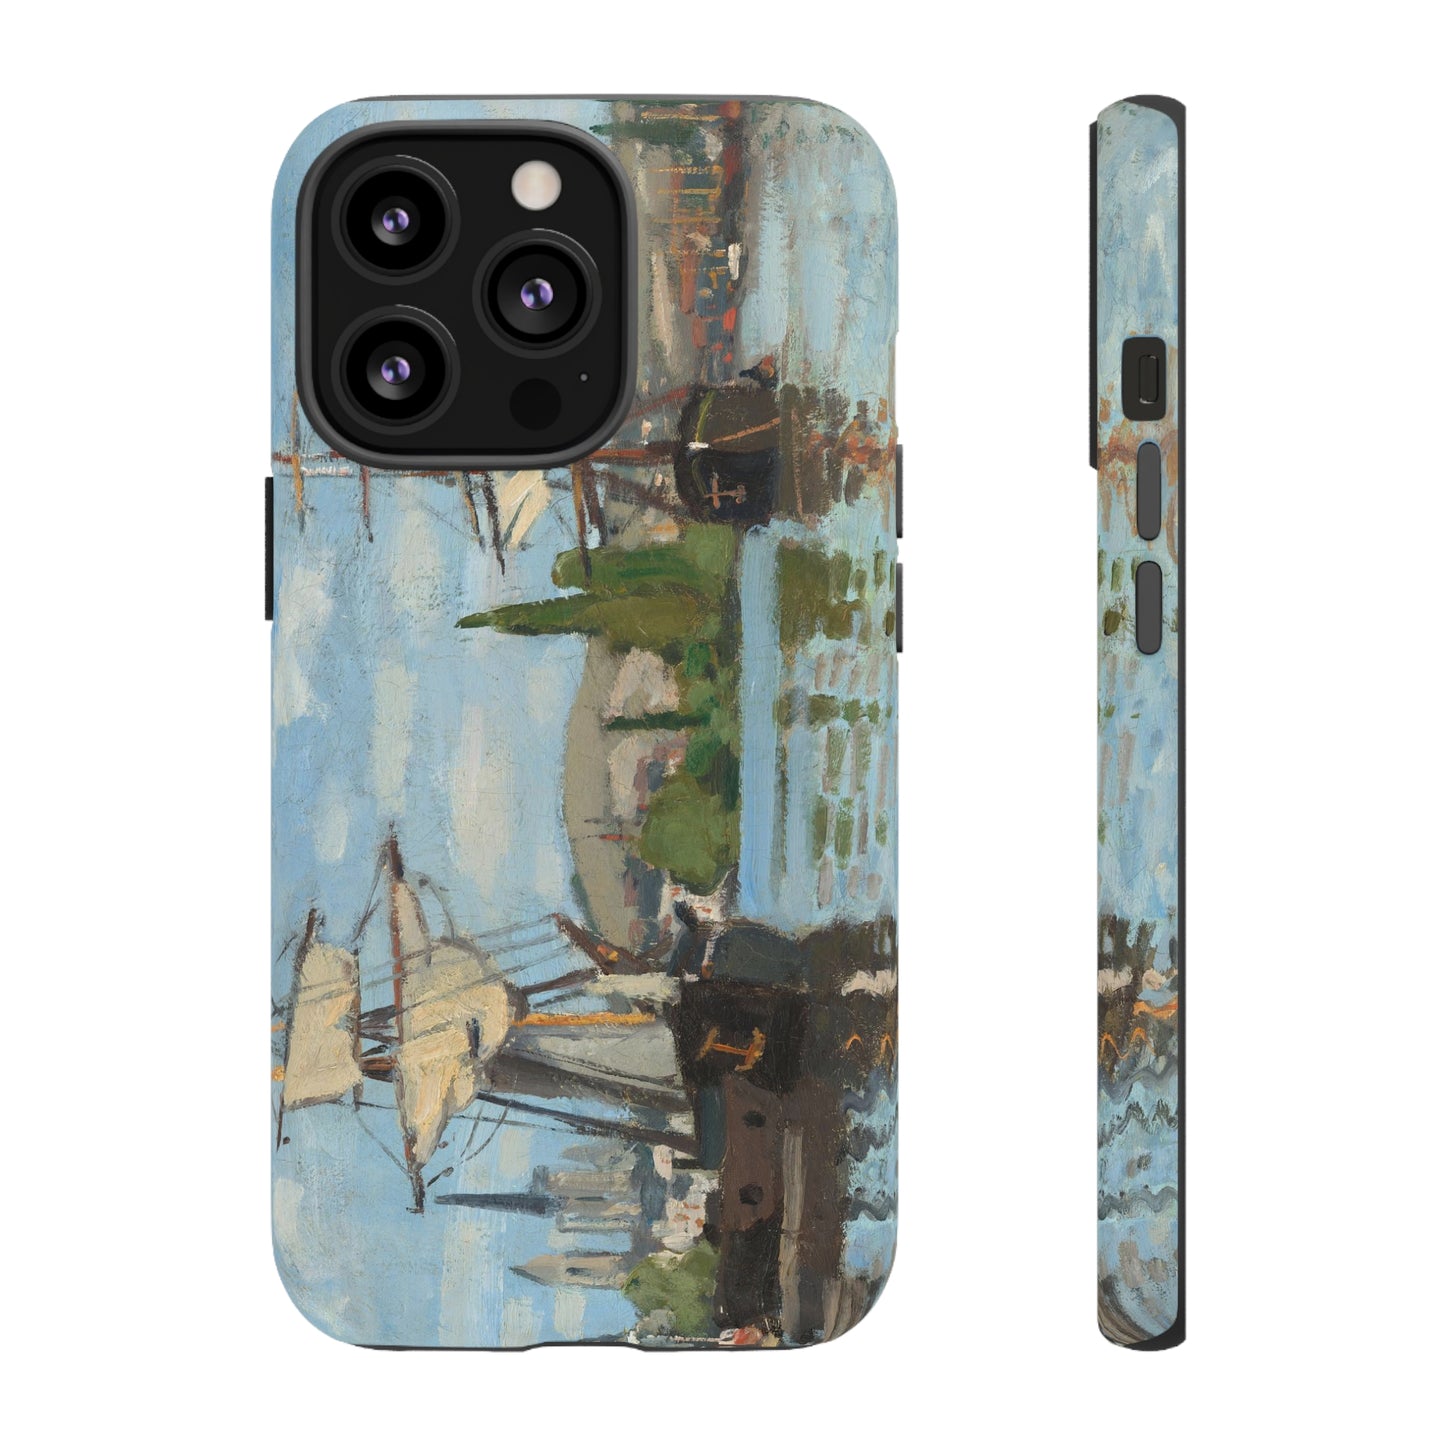 Ships Riding on the Seine at Rouen by Claude Monet - Cell Phone Case